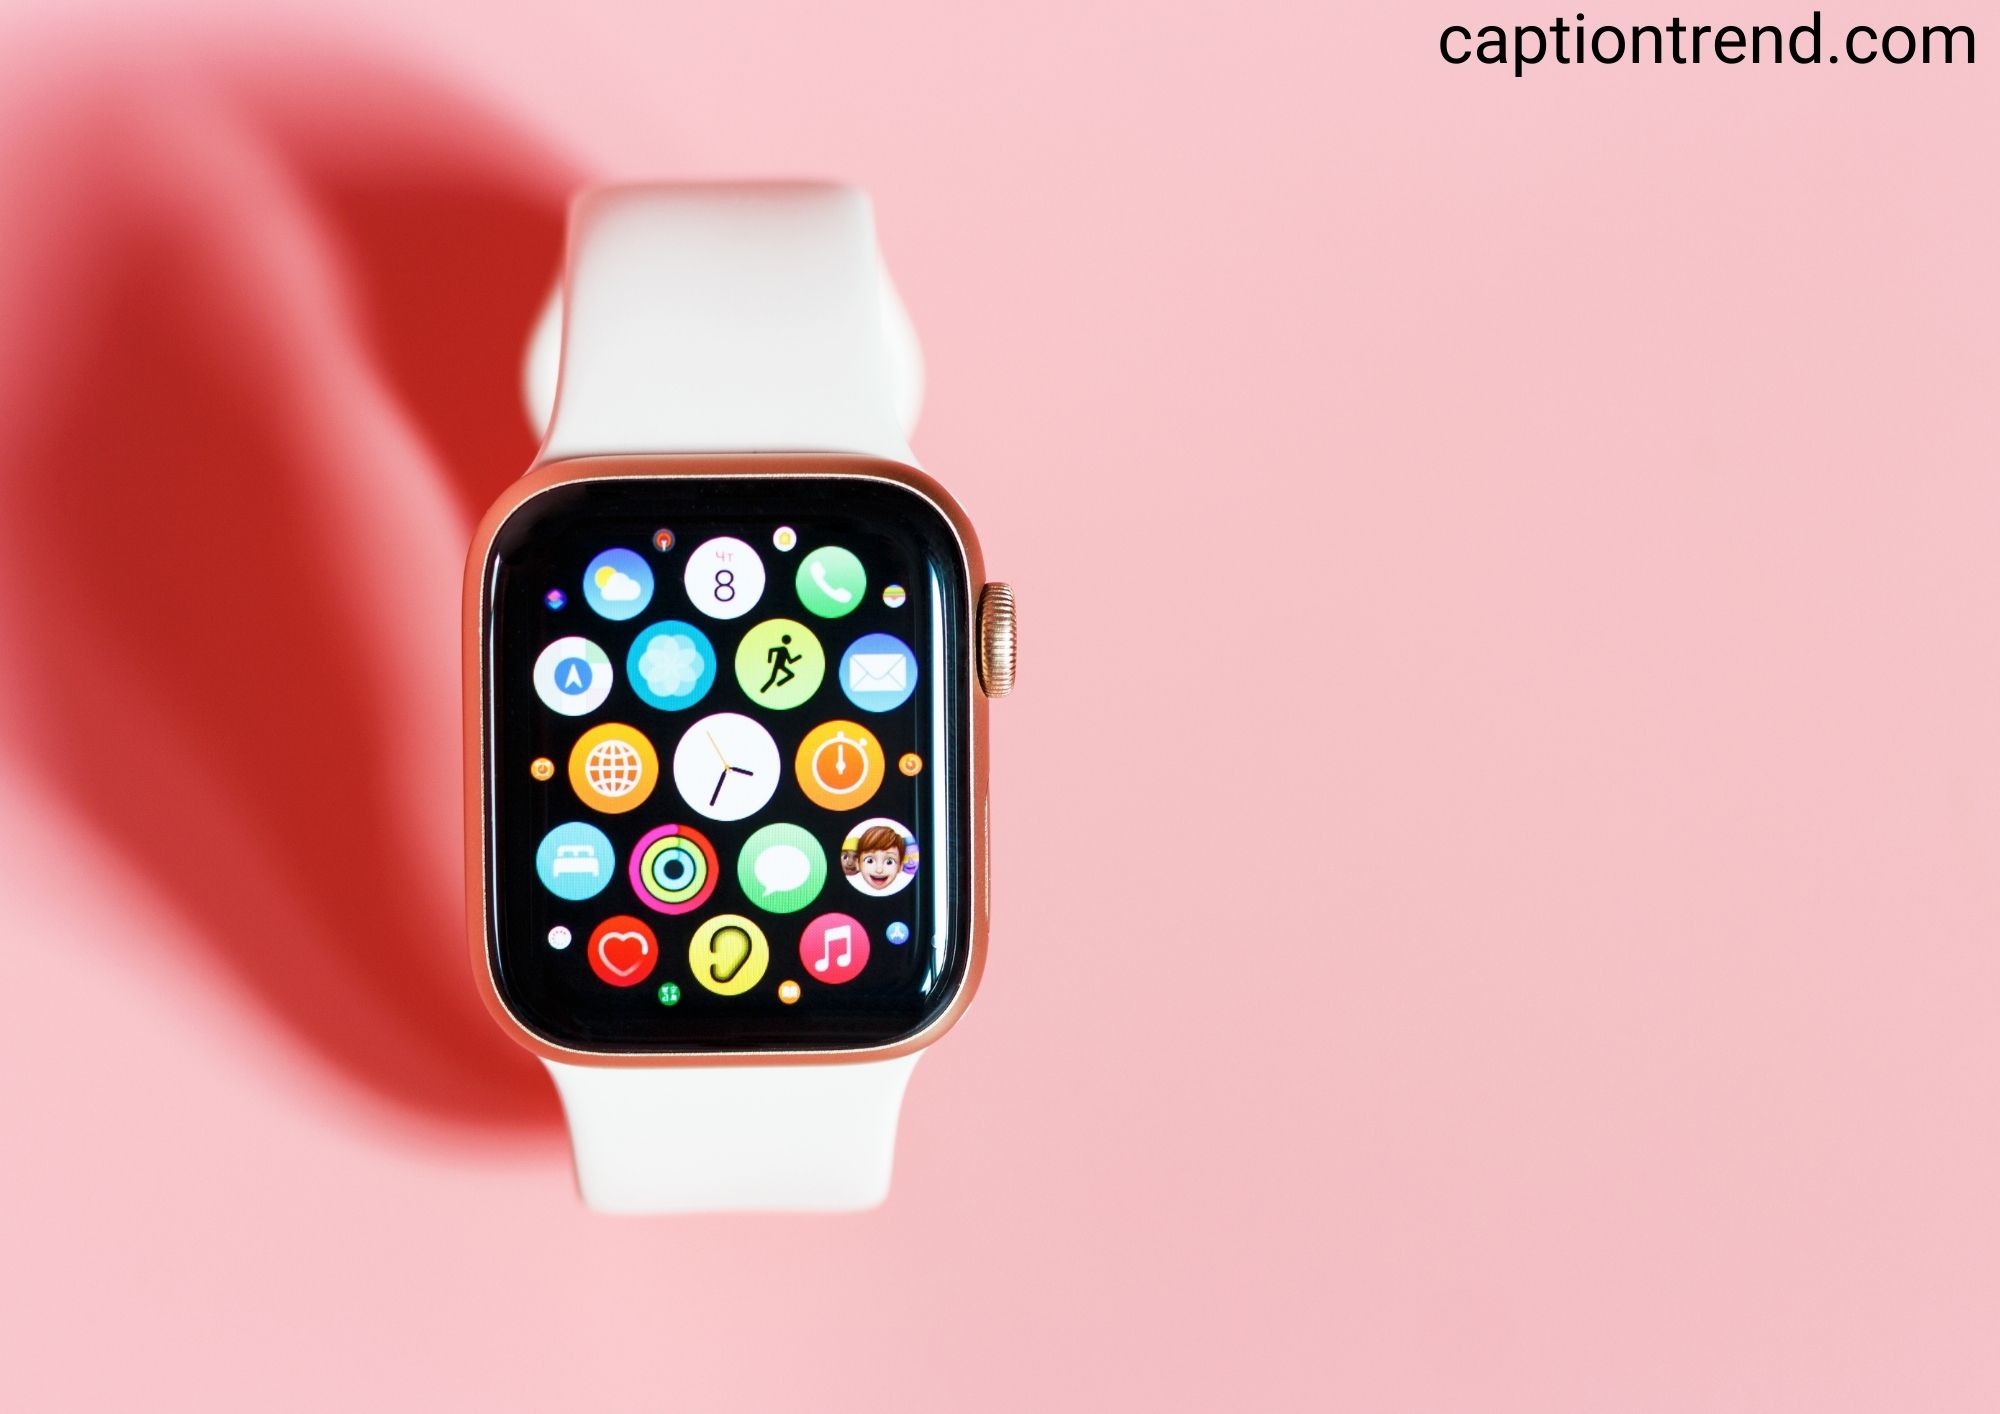 Apple Watch Captions for Instagram With Quotes